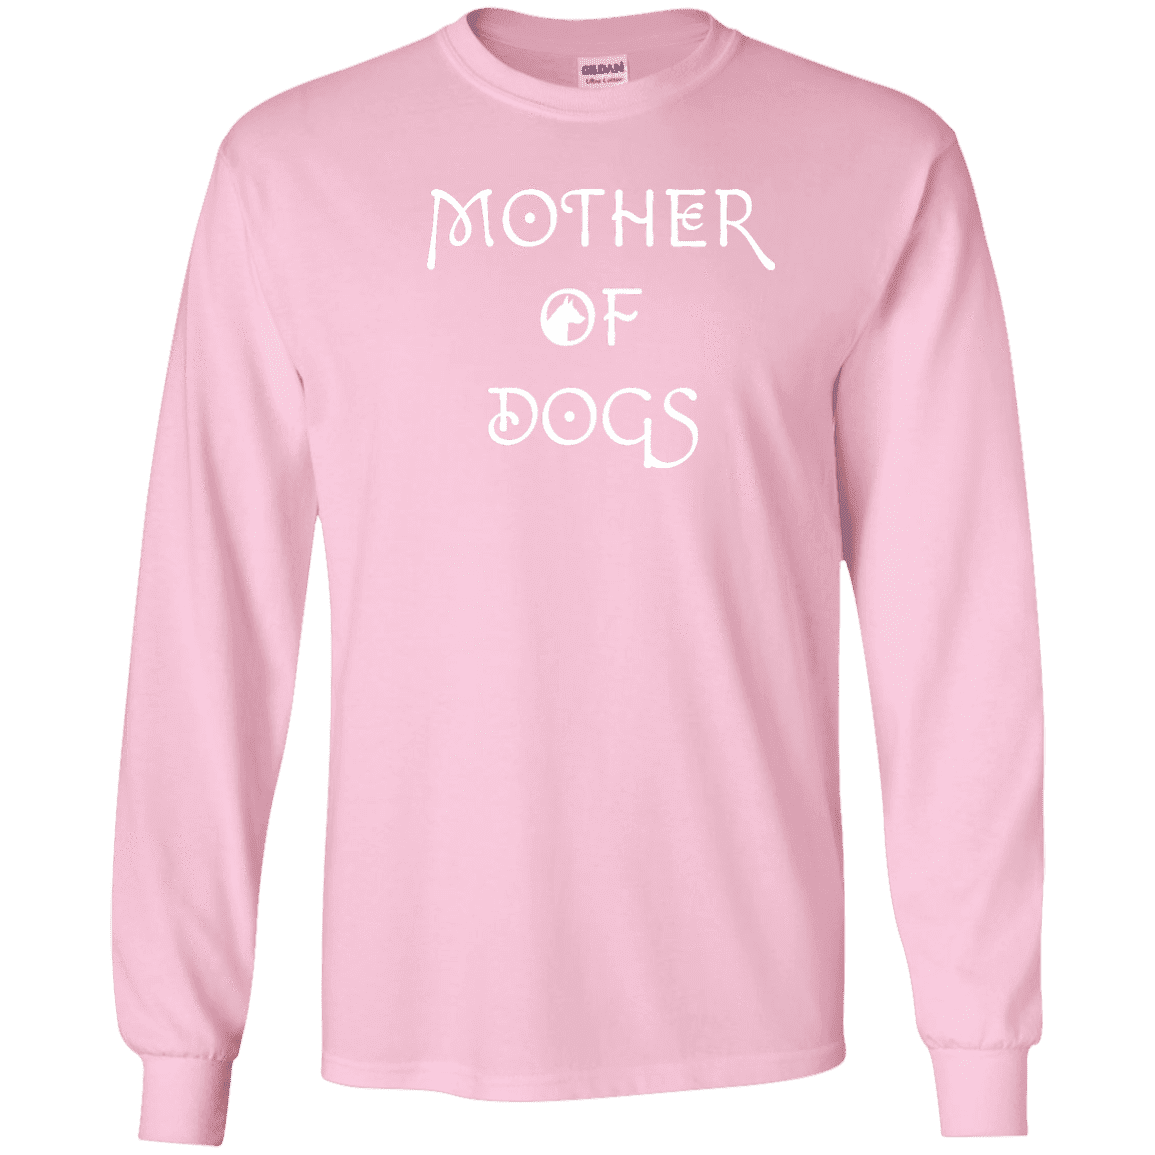 Mother Of Dogs - Long Sleeve T Shirt.